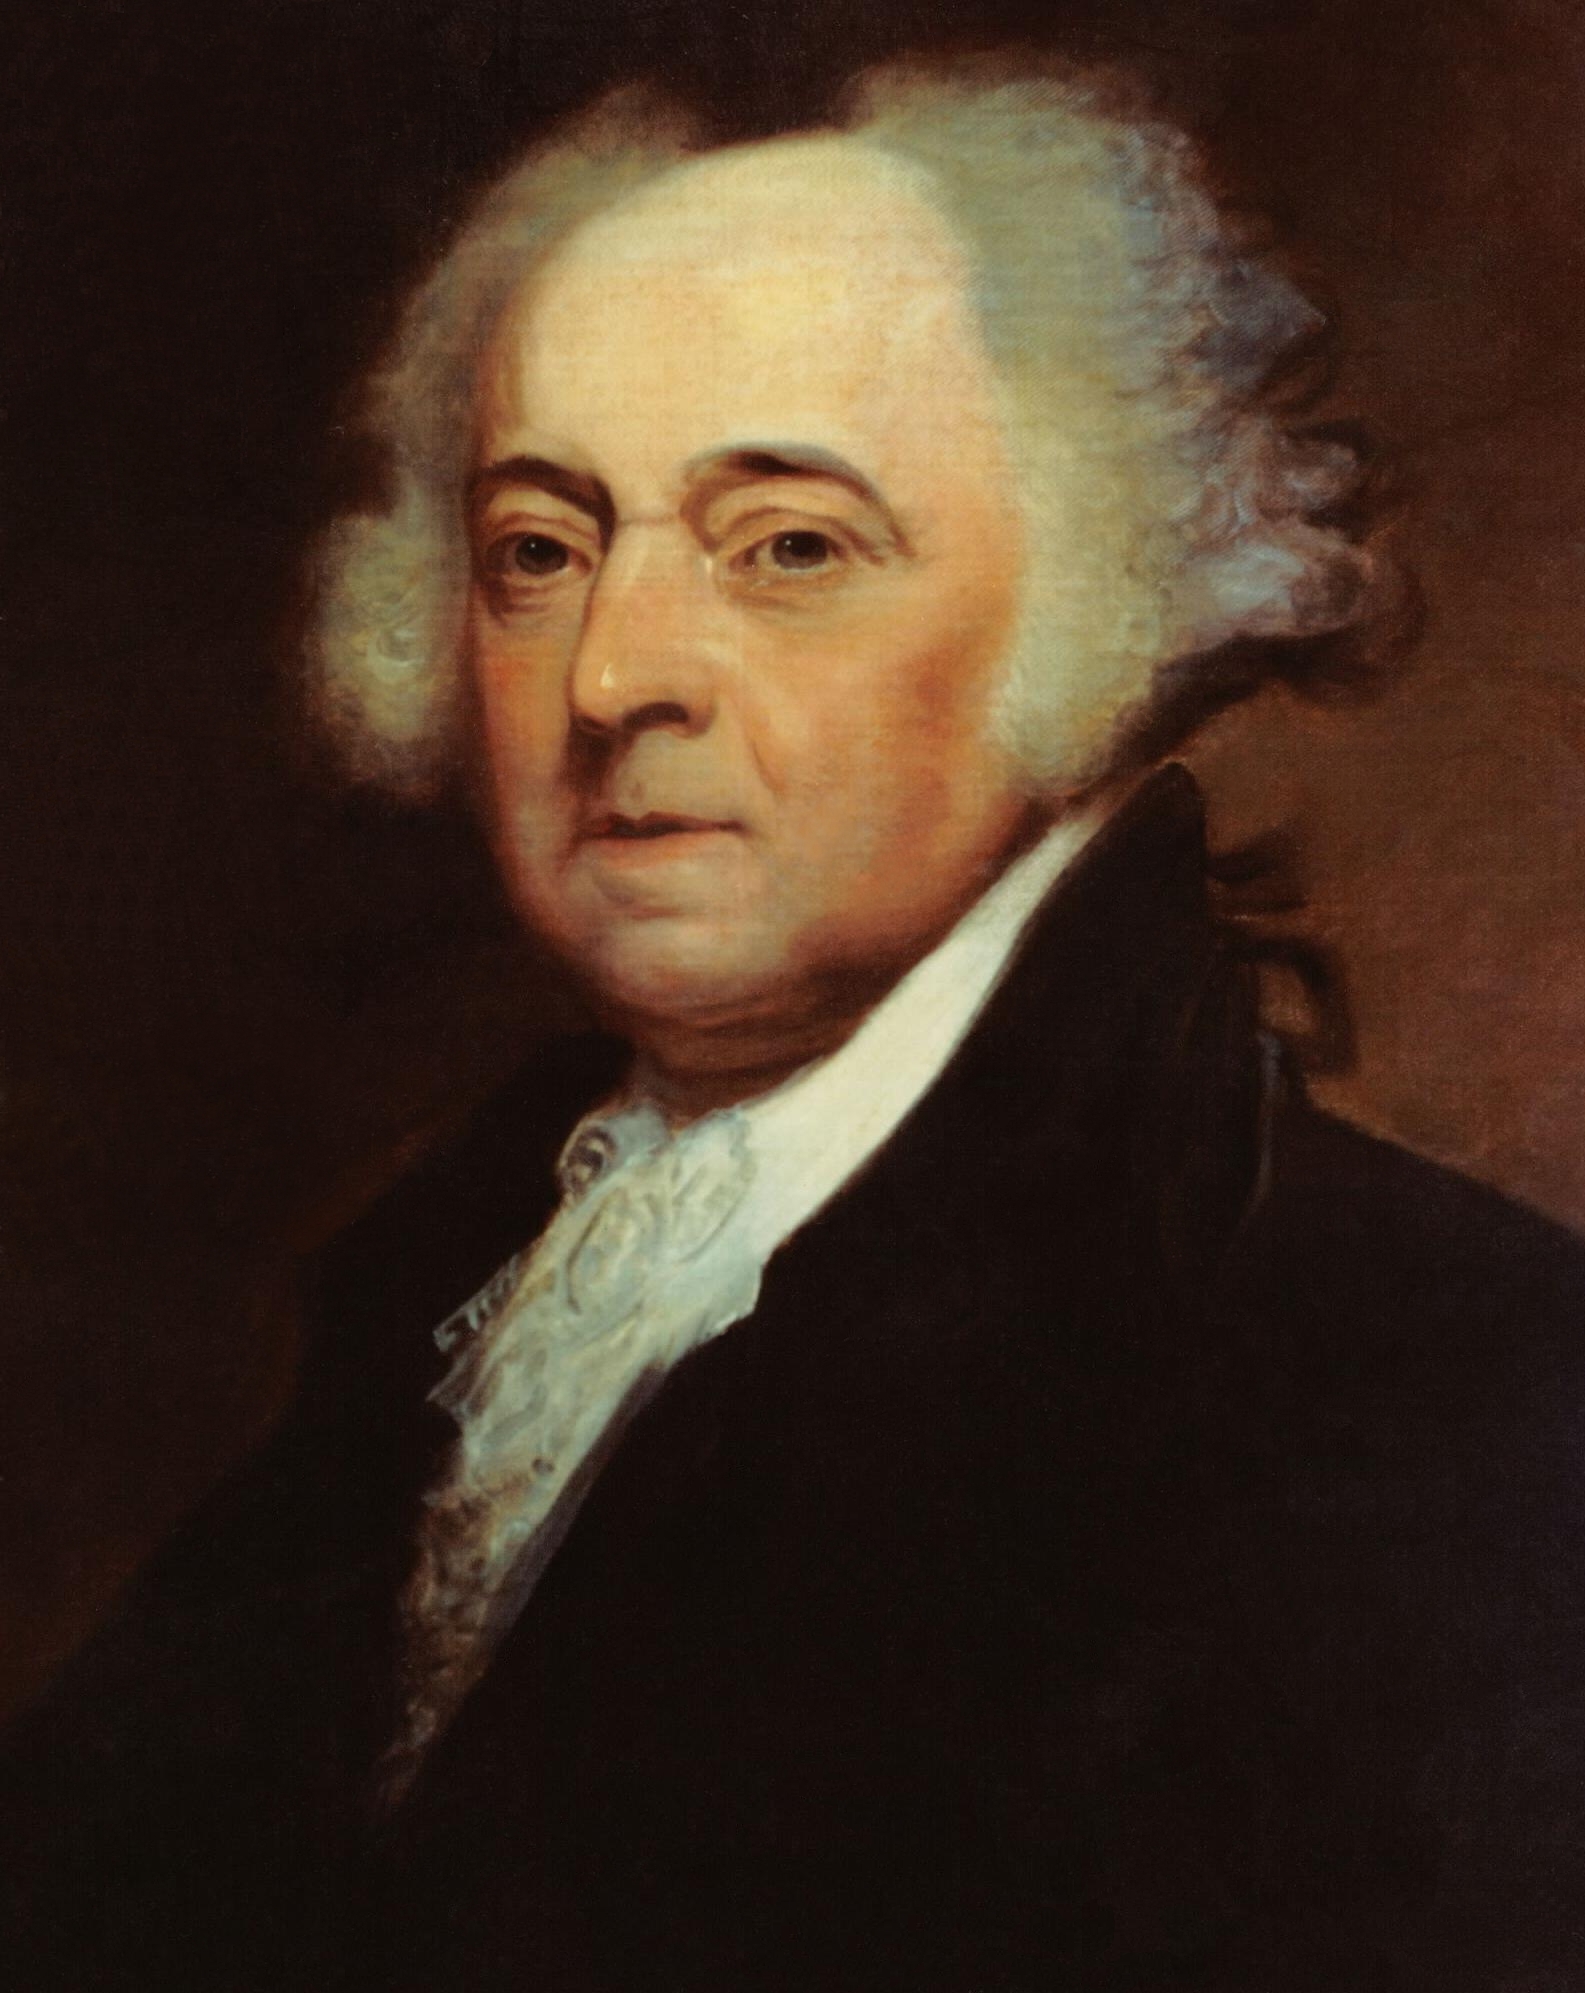 http://upload.wikimedia.org/wikipedia/commons/2/25/US_Navy_031029-N-6236G-001_A_painting_of_President_John_Adams_(1735-1826),_2nd_president_of_the_United_States,_by_Asher_B._Durand_(1767-1845)-crop.jpg